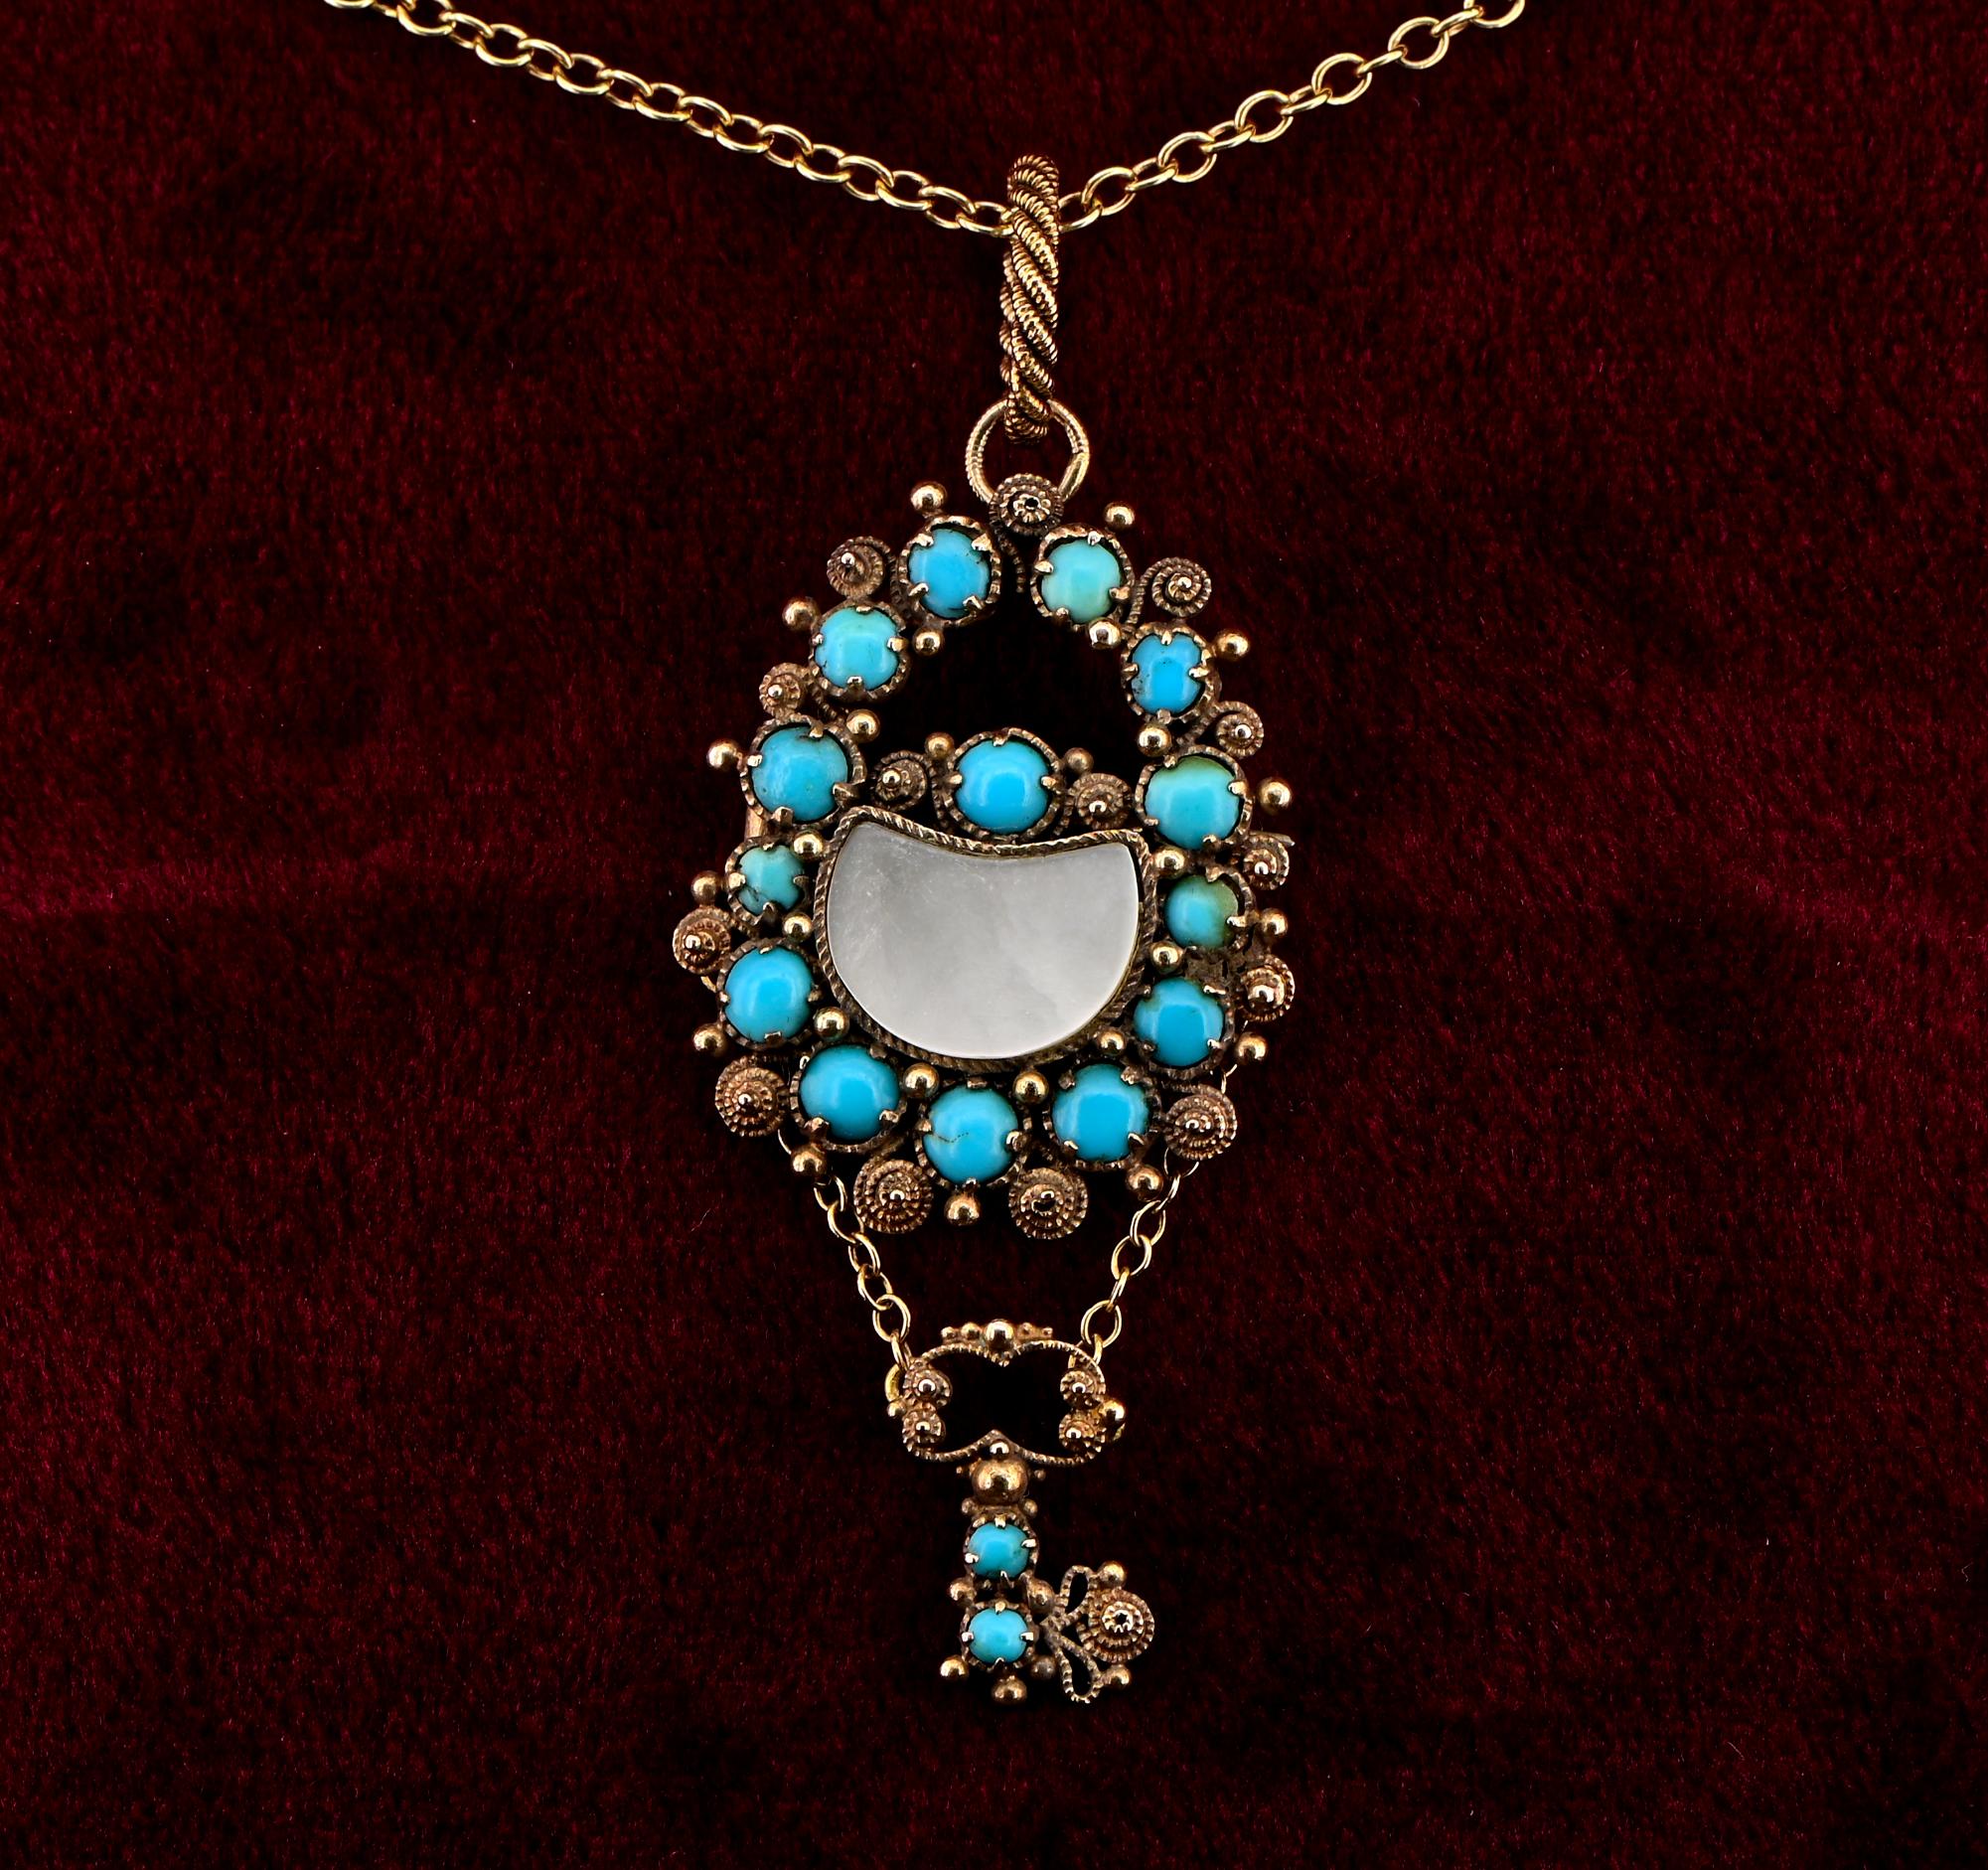 Georgian Symbol of Love
Georgian period ‘Key to my Heart’ pendant, 1810 ca
Rare love token from the period, hand crafted of solid 18 Kt gold, lovely padlock enhanced by natural Turquoise cabochons and a centre Mother of Pearl crescent moon shaped,